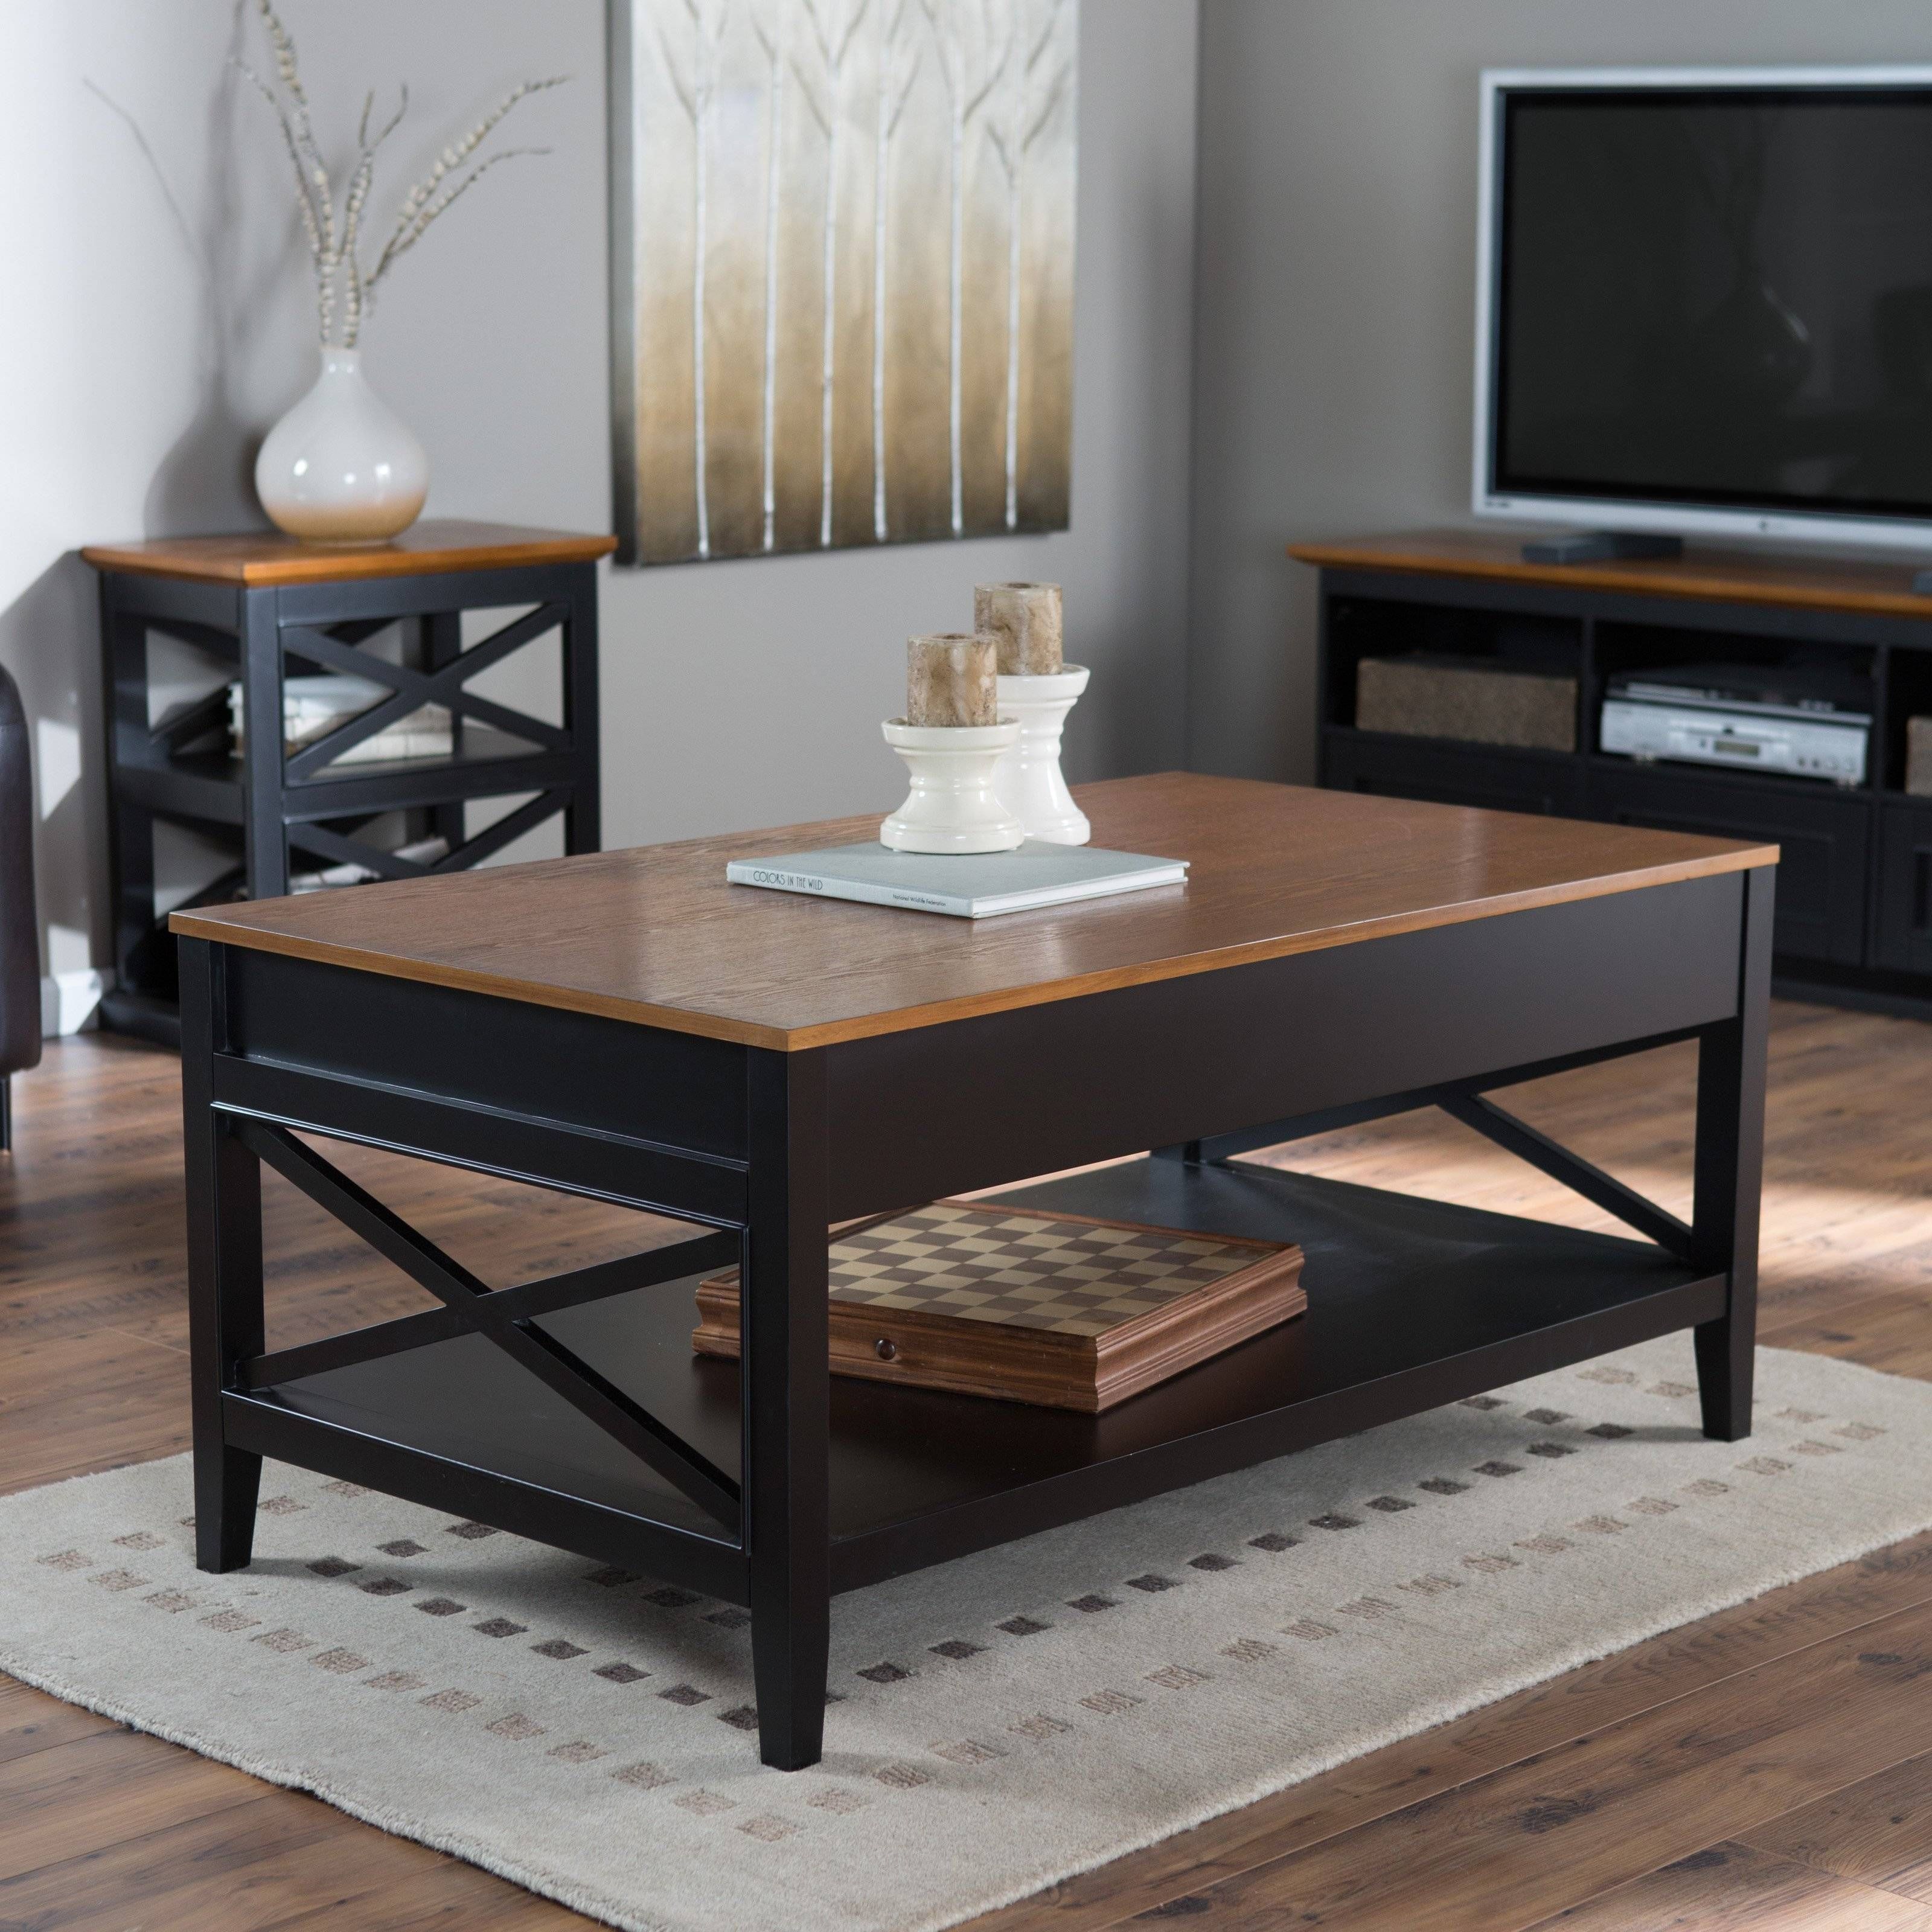 Belham Living Hampton Storage And Lift Top Coffee Table | Hayneedle For Lift Top Oak Coffee Tables (View 23 of 30)